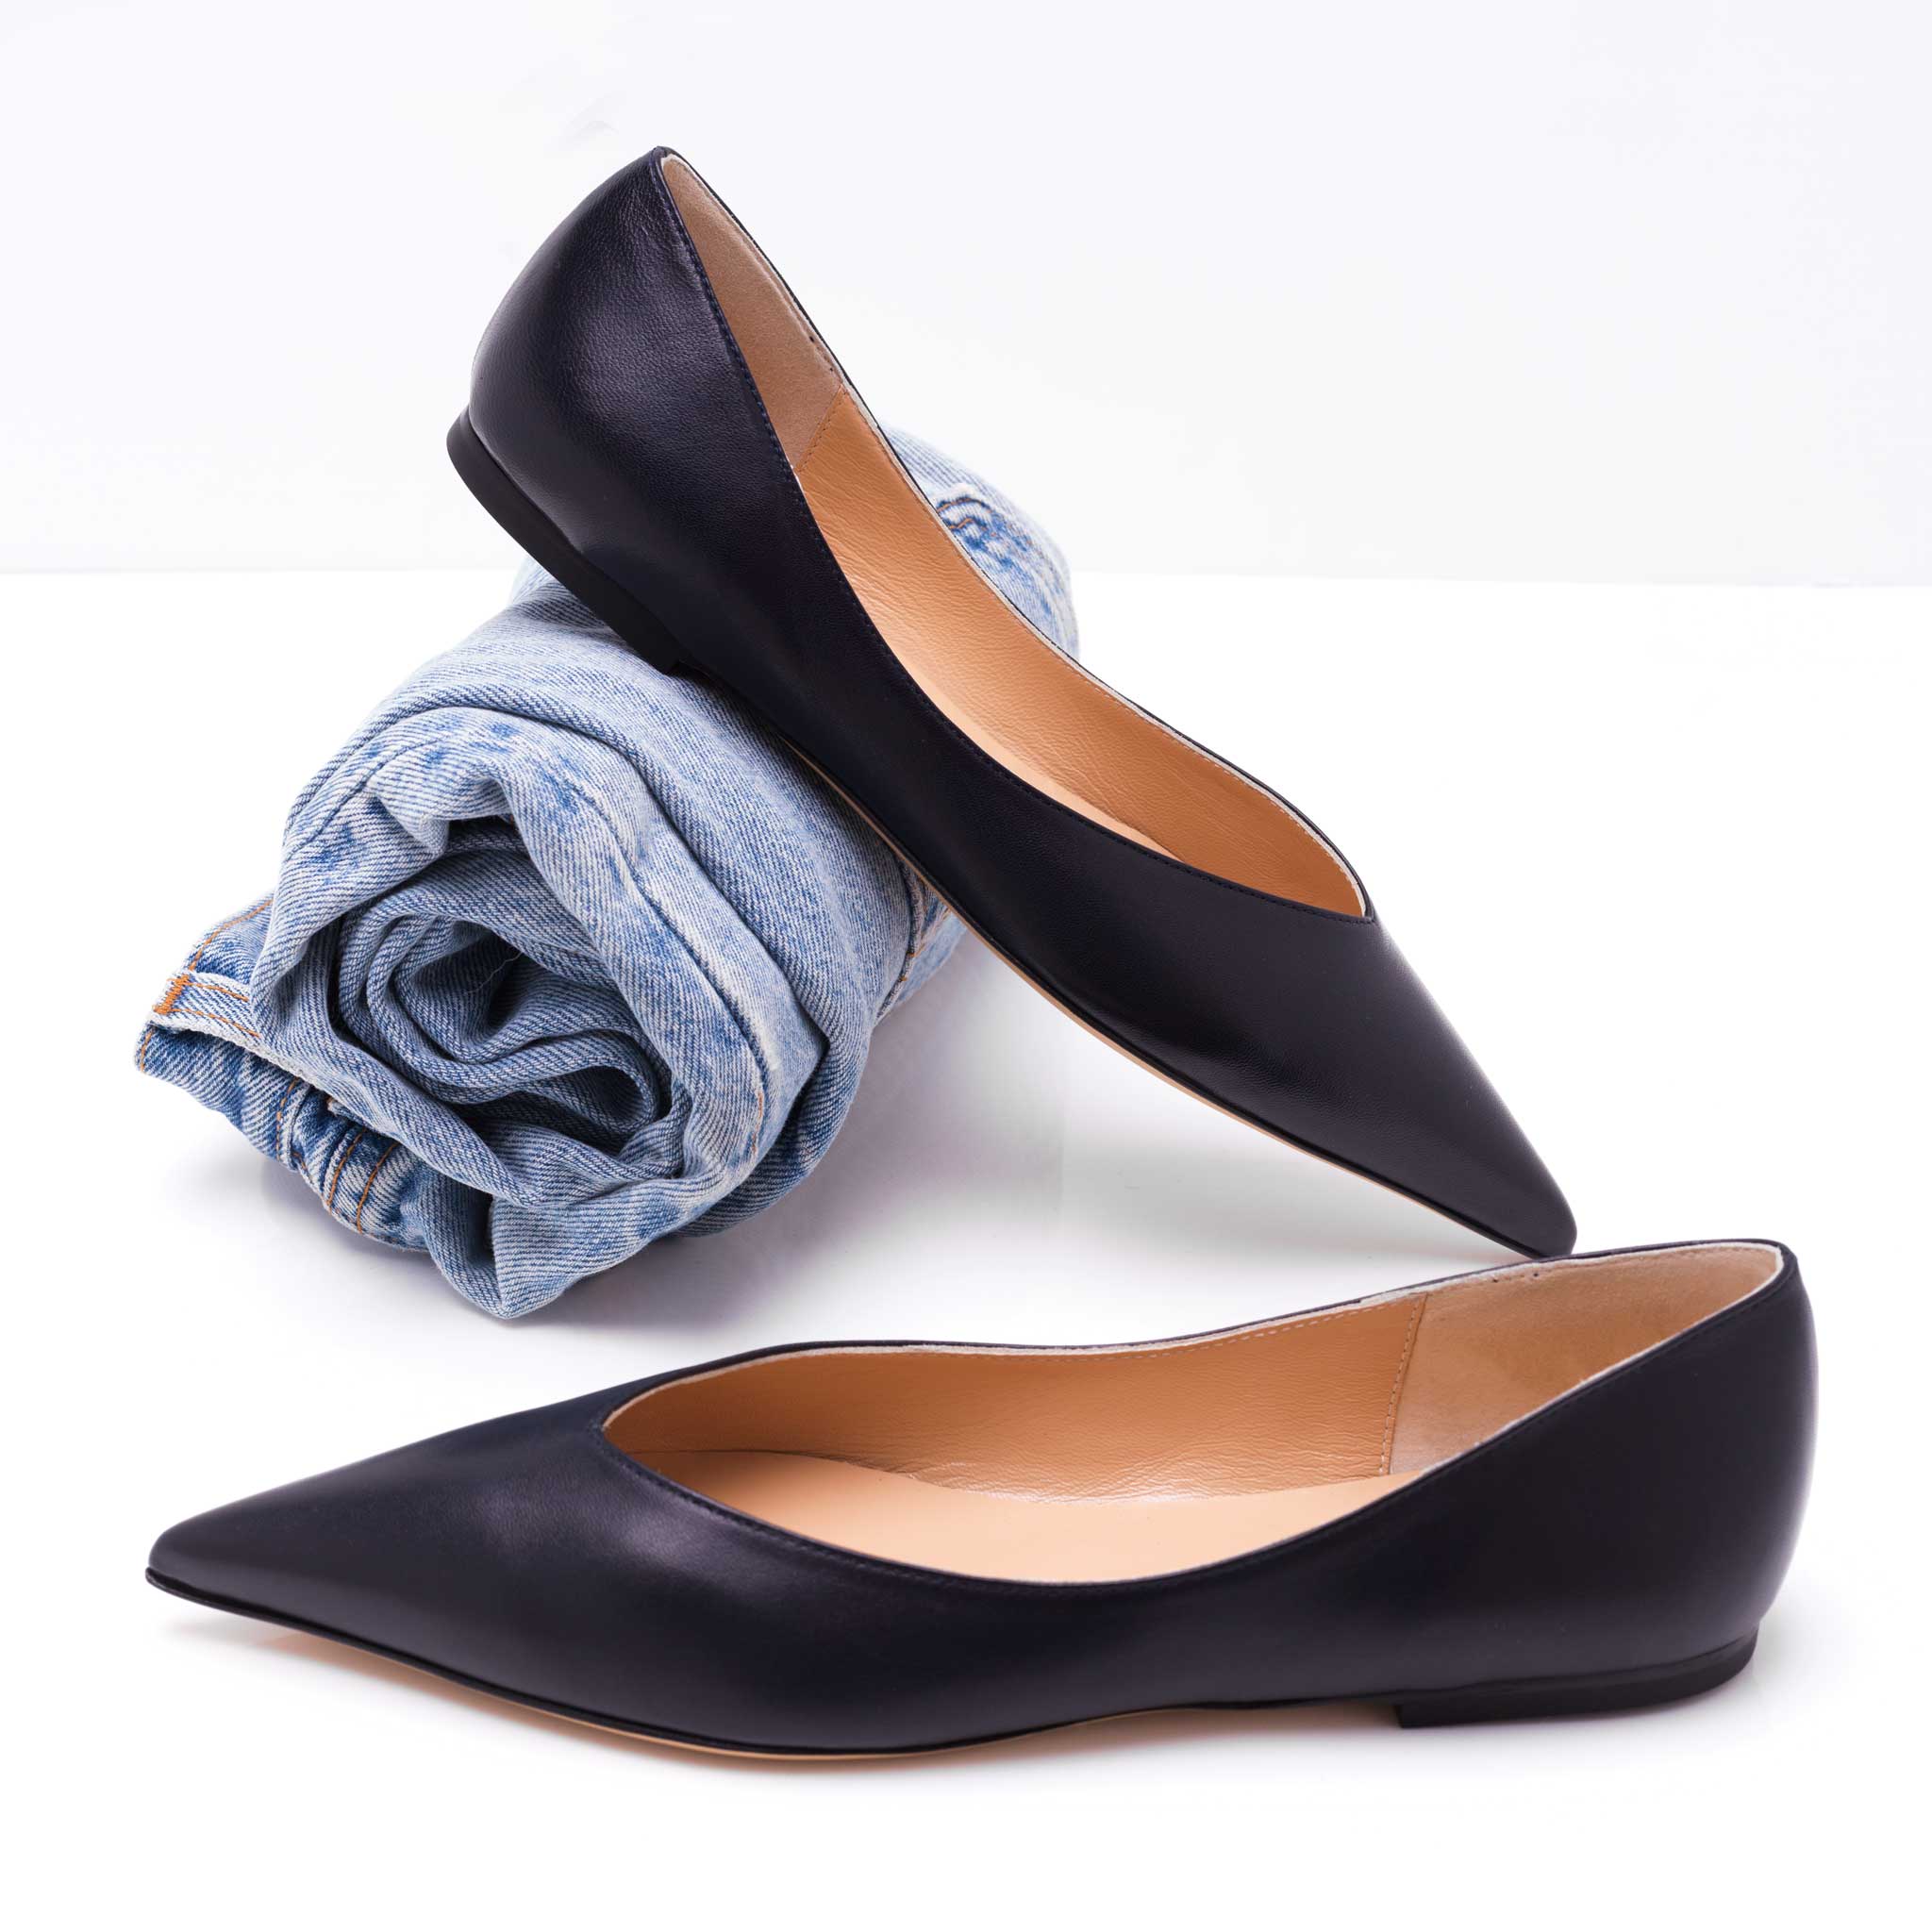 leather navy blue slip on flat shoes for women shown with vintage levis.